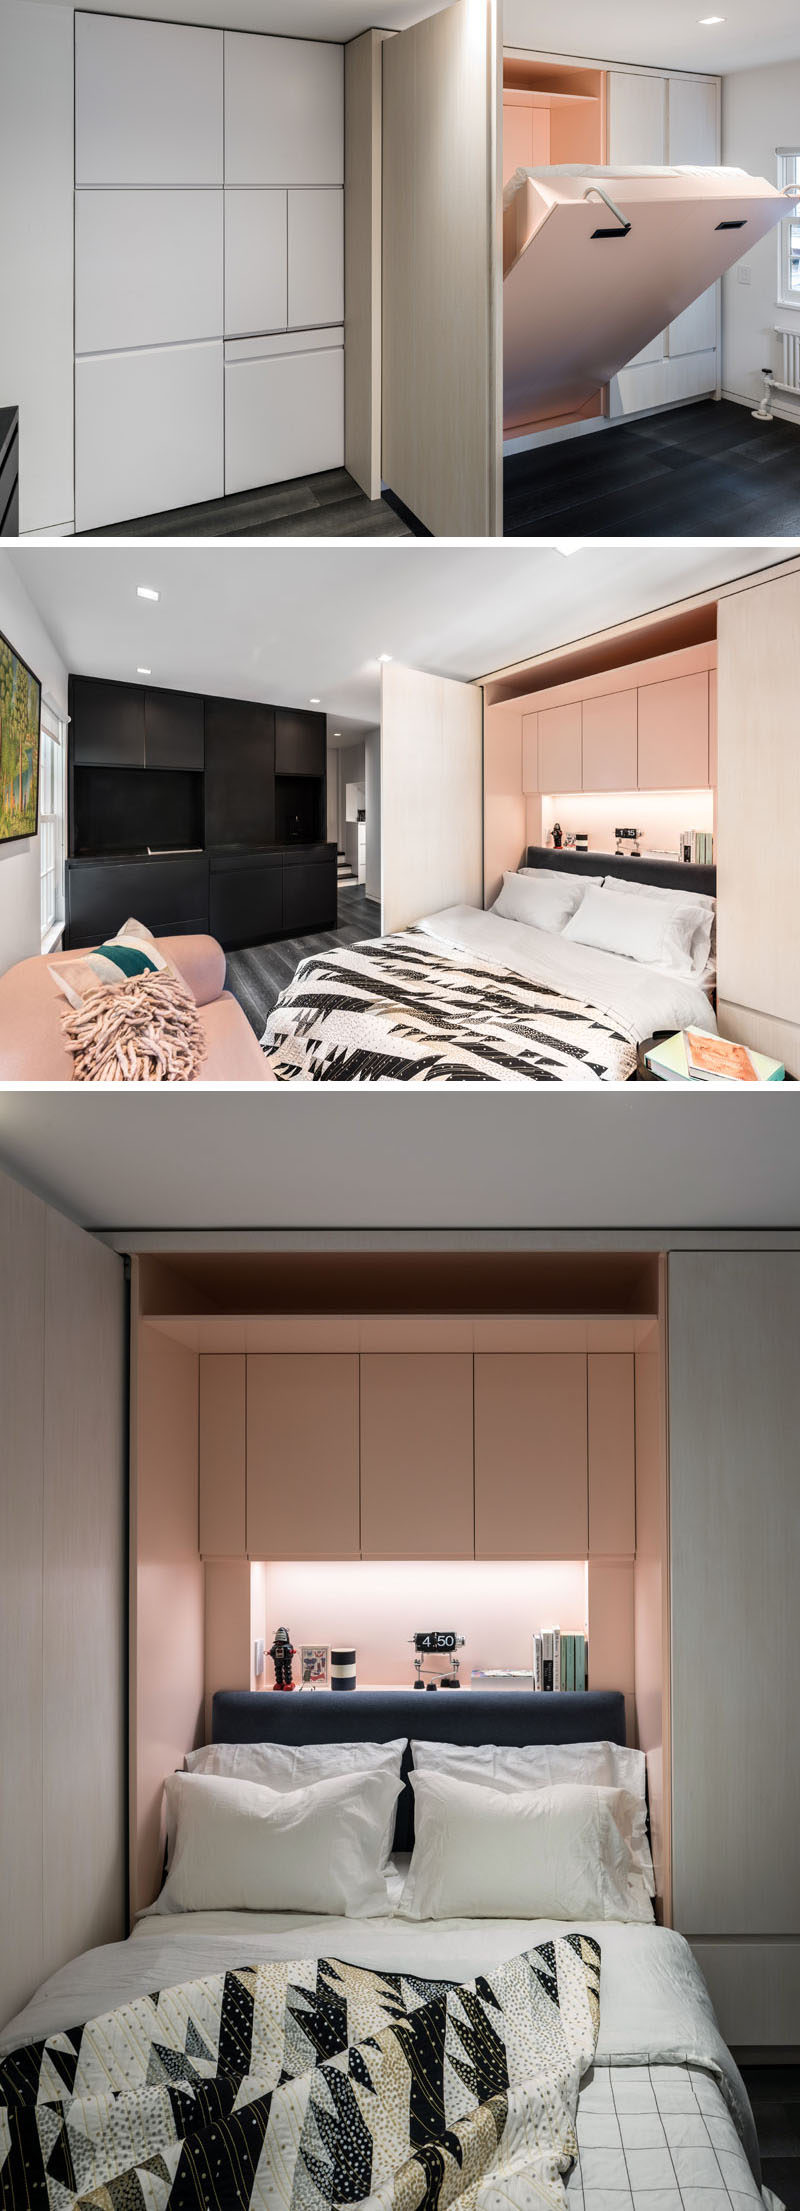 This micro apartment has a wall of cabinets, and within the wooden section is a bed. The bed folds down to reveal a headboard and even more storage space, as well as hidden lighting.